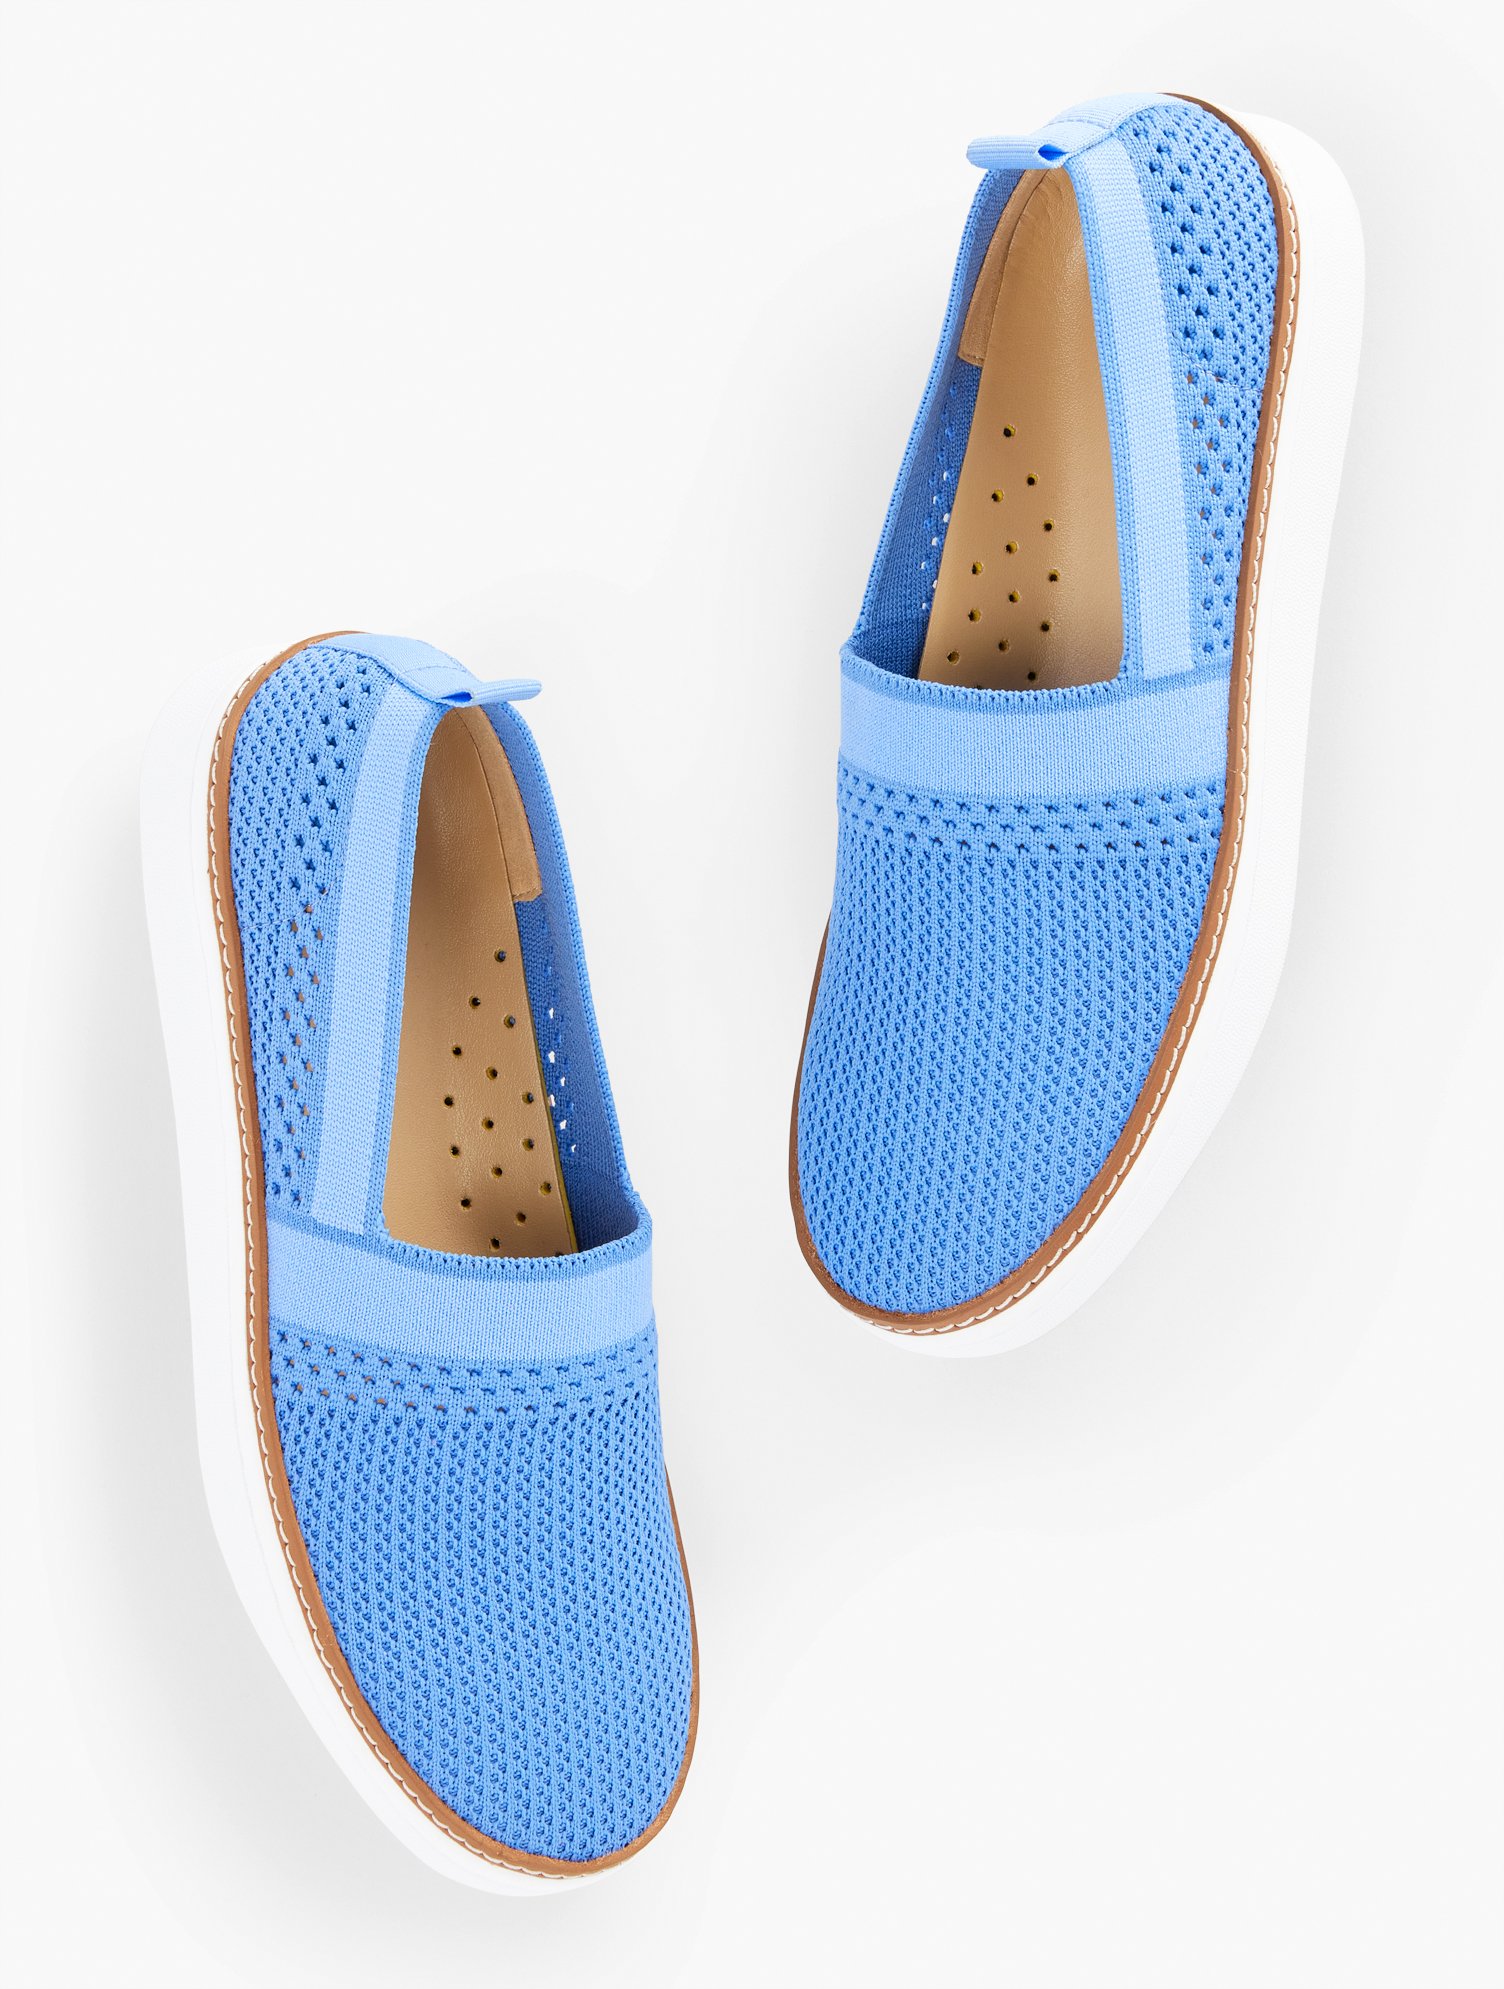 Talbots Brittany Knit Slip-on Sneakers - Blue Iris/blue Sky - 5m - 100% Cotton  In Blue Iris,blue Sky